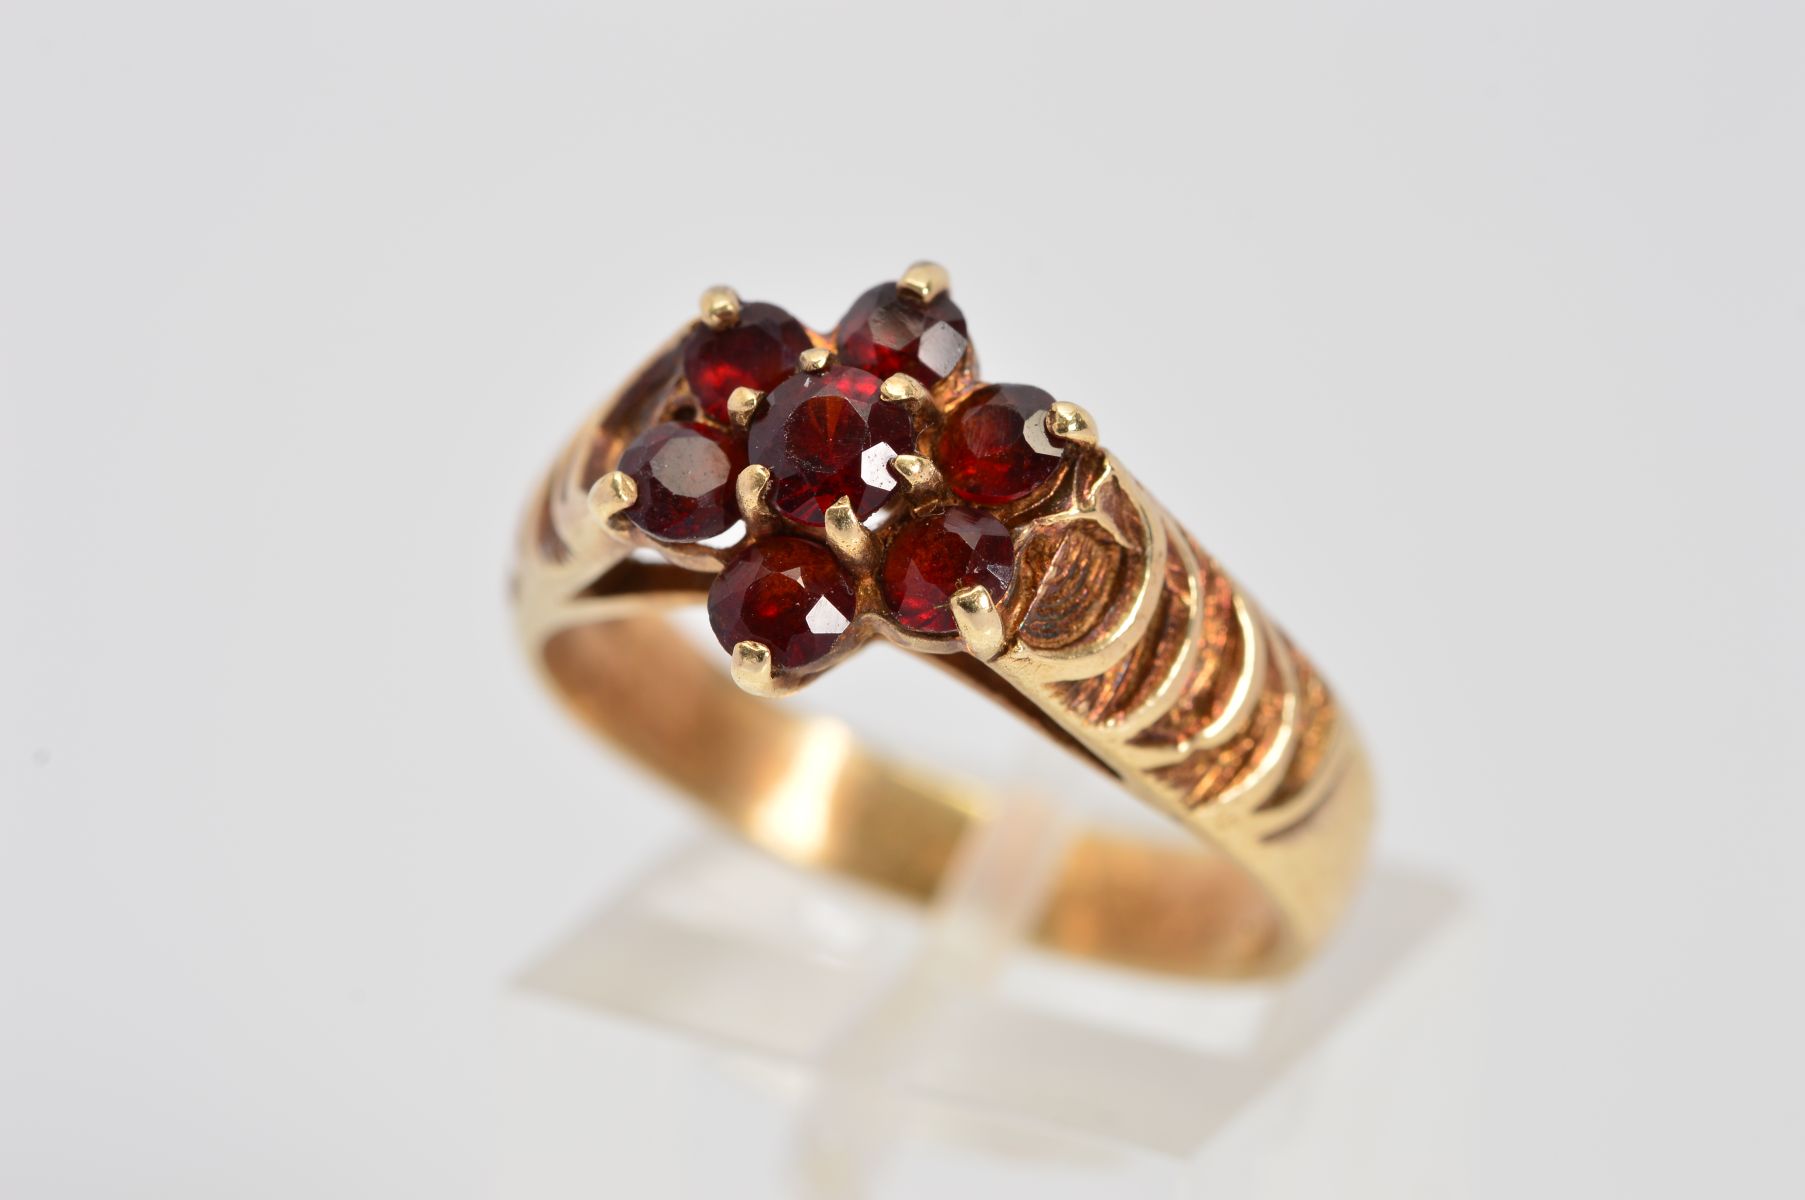 A 9CT GOLD GARNET CLUSTER RING designed as a floral cluster of seven circular garnets to the